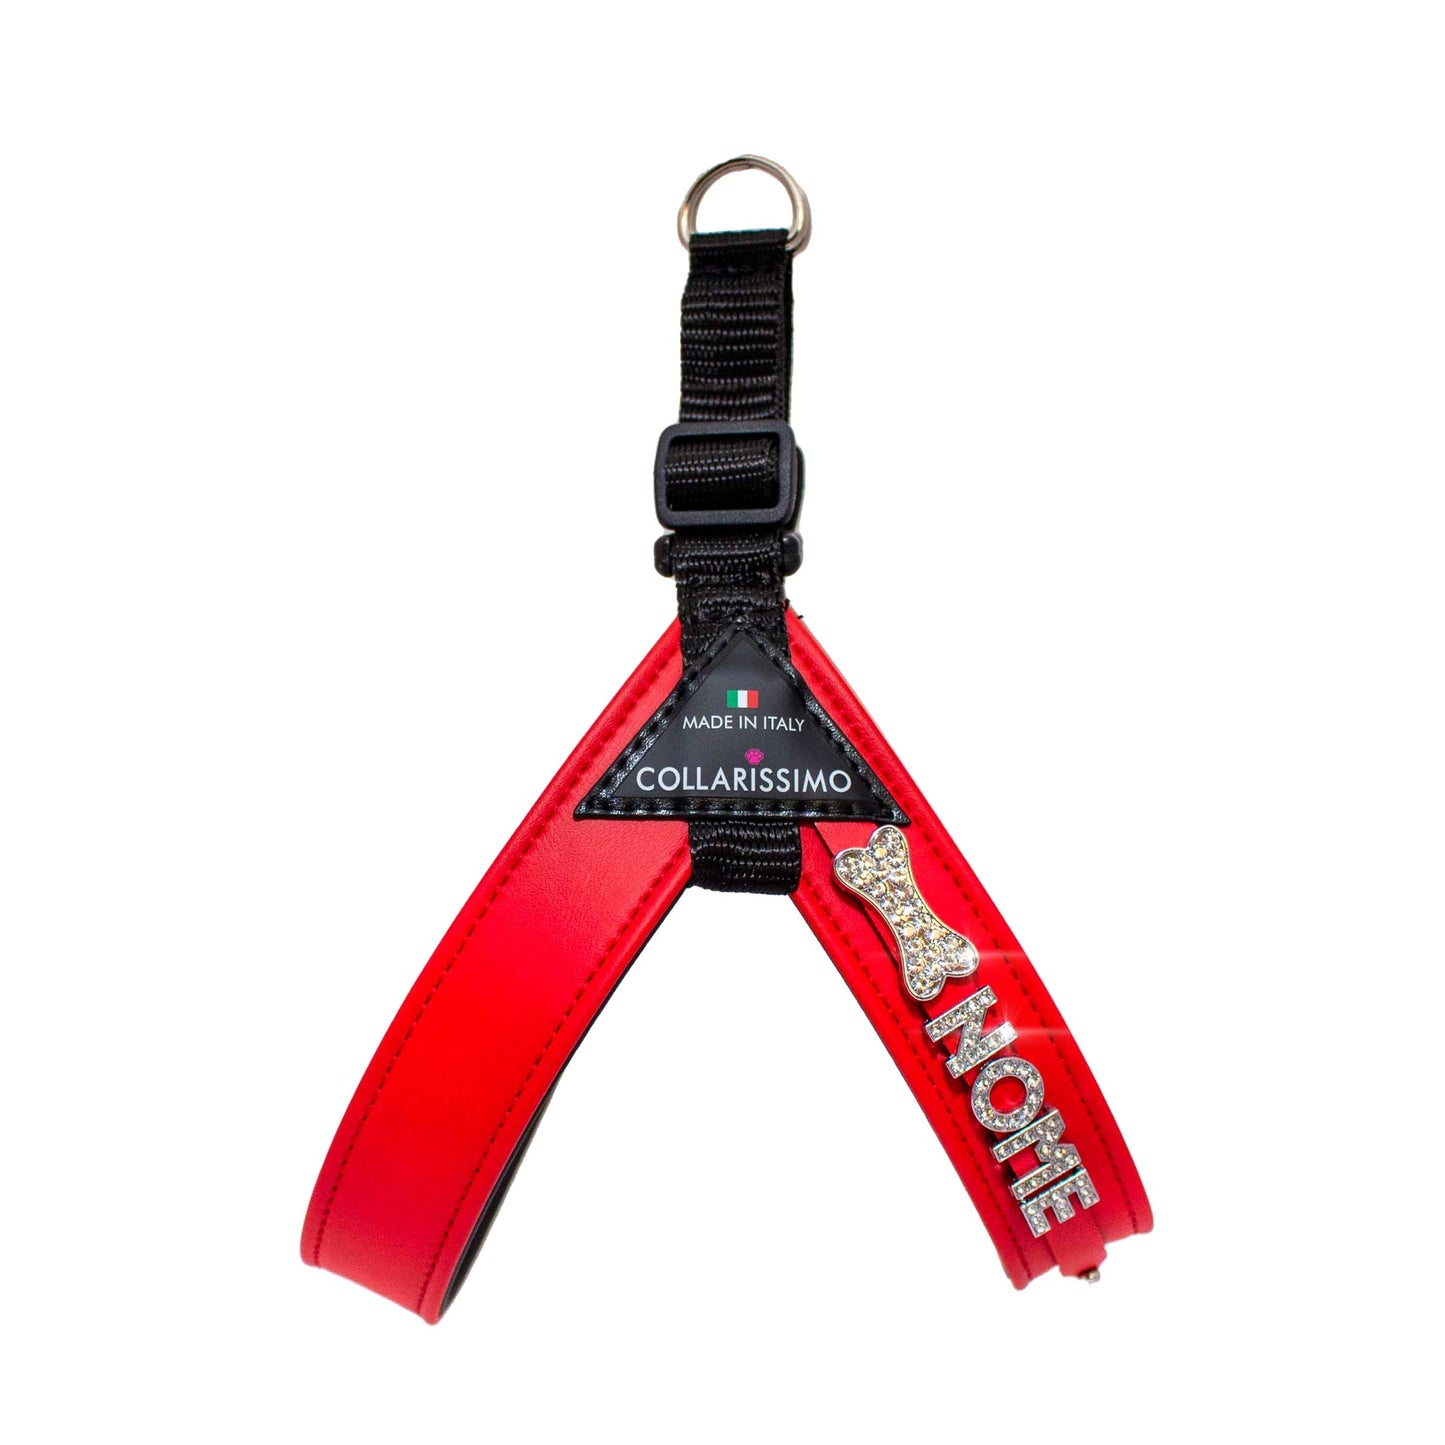 Luxury harness in Italian eco-leather with Name and Charms. Luxury accessories for dogs. Made in Italy